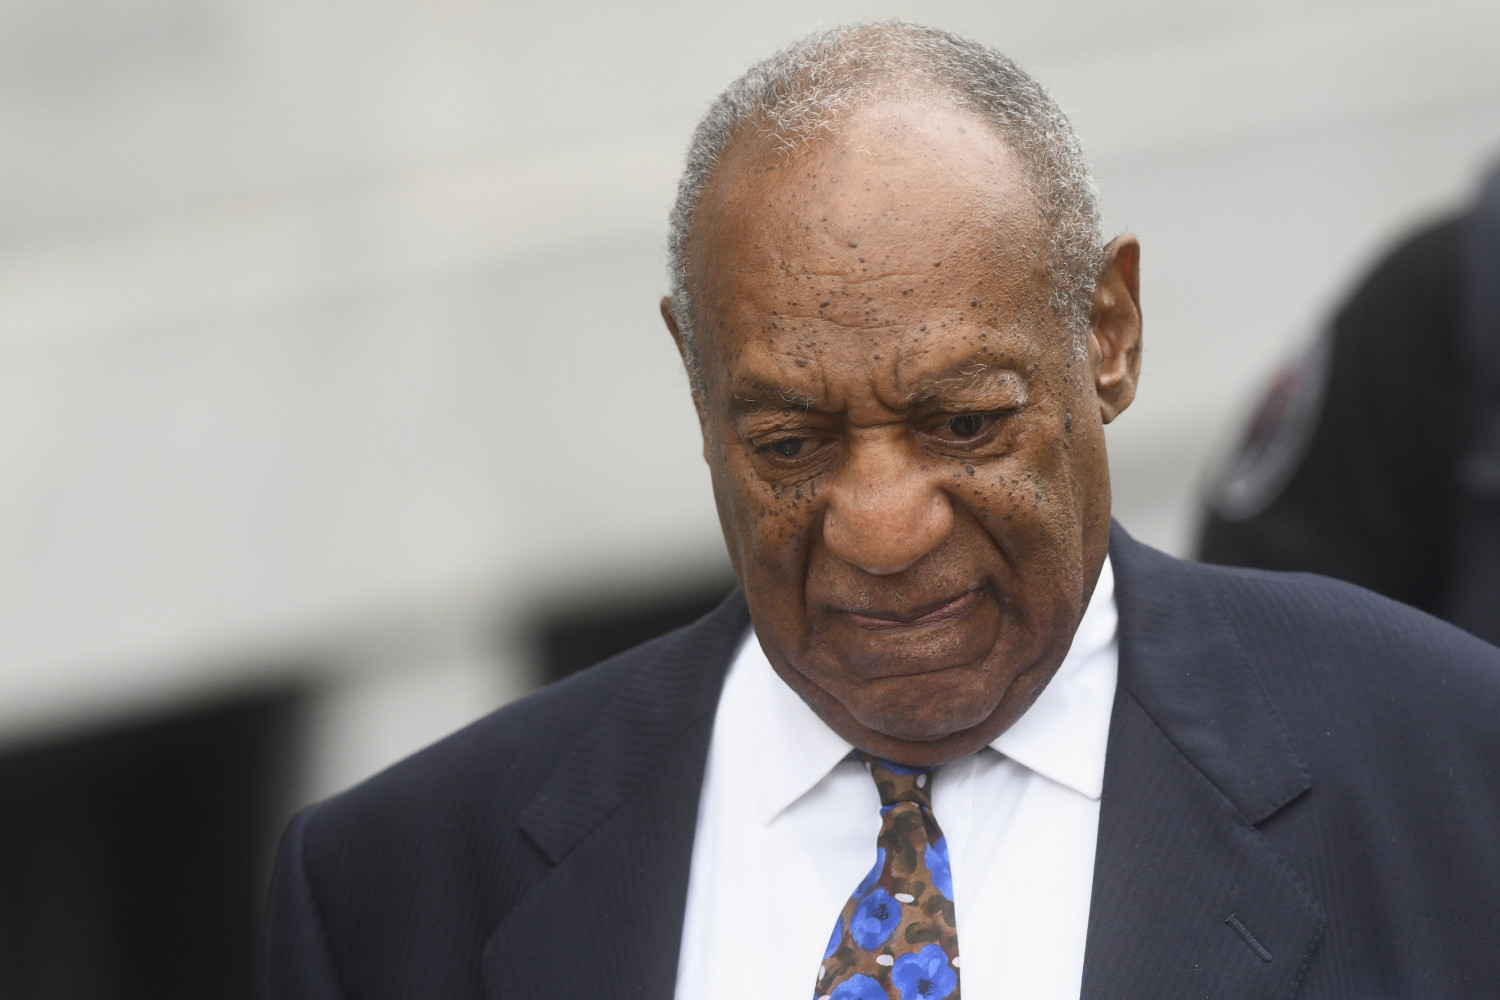 People React to Bill Cosby Being Released From Jail